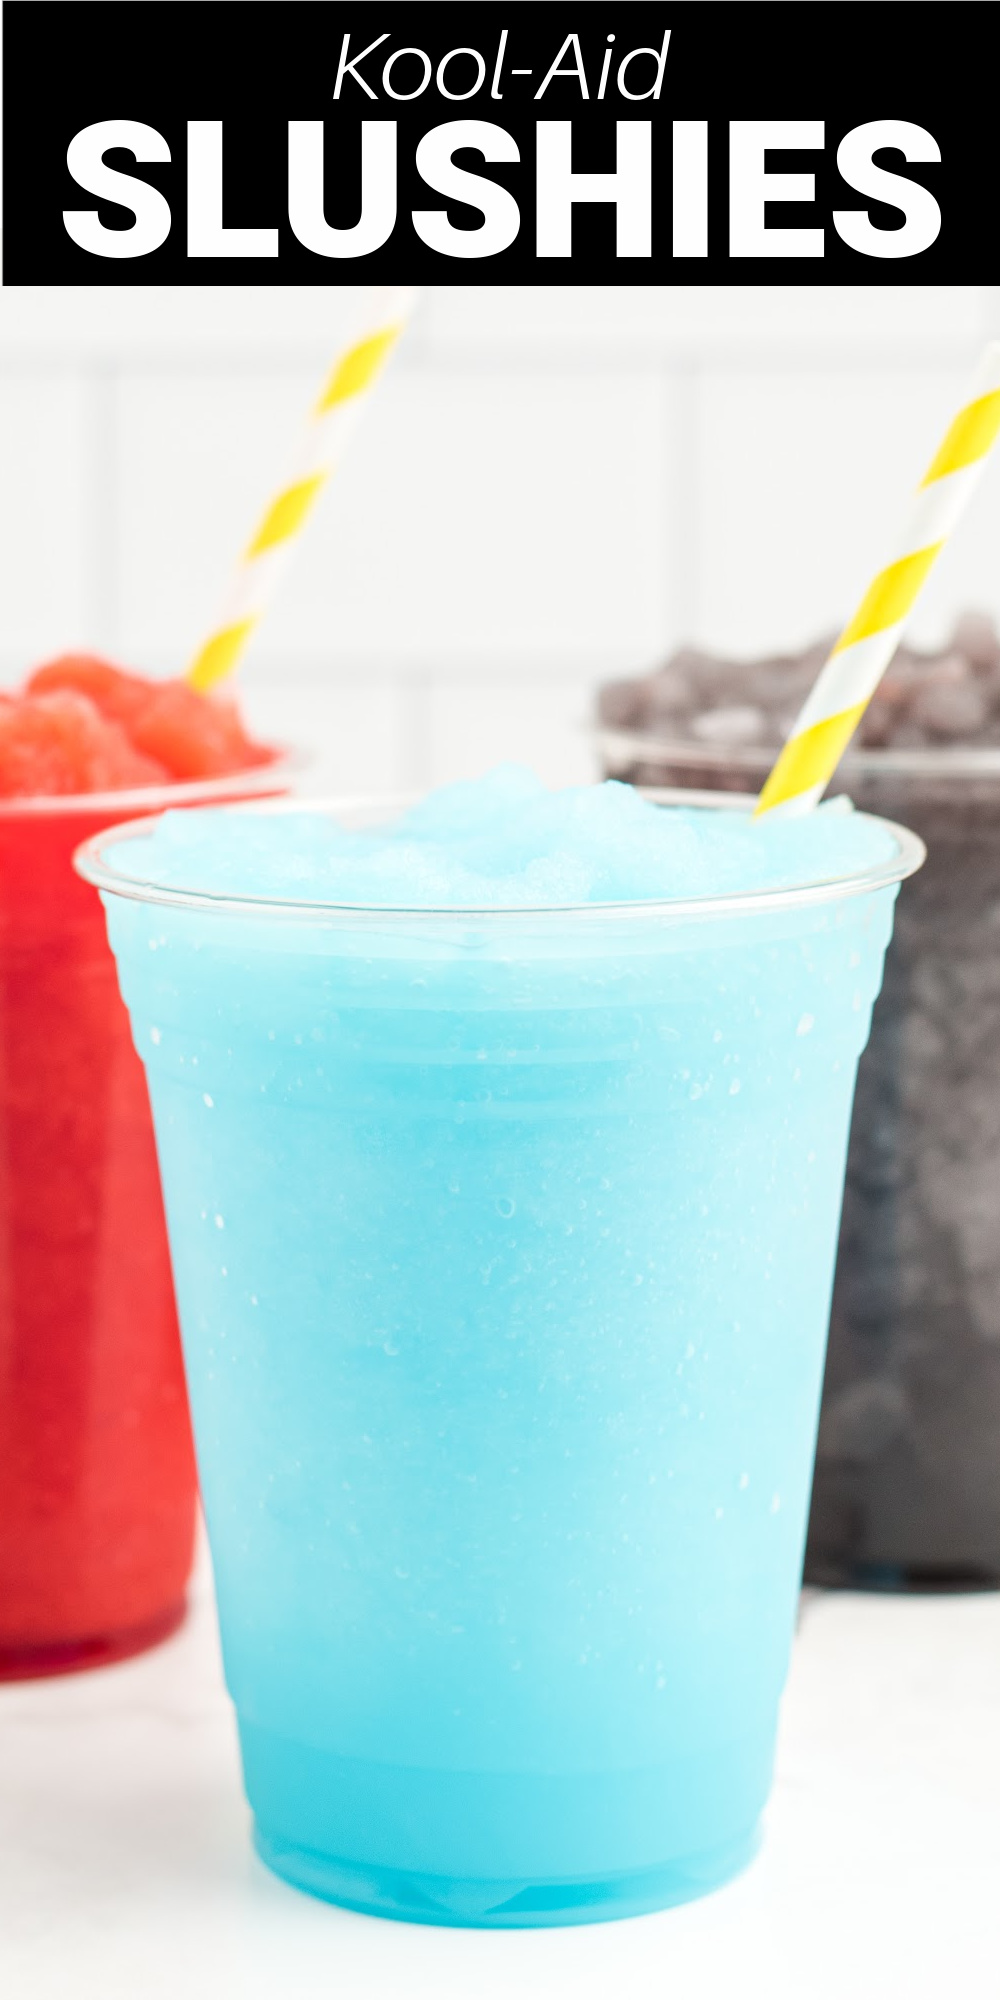 Kool-Aid Slushies are easy four-ingredient homemade slushies that you can make in a variety of flavors. They are the perfect cool down drink on a hot summer day.